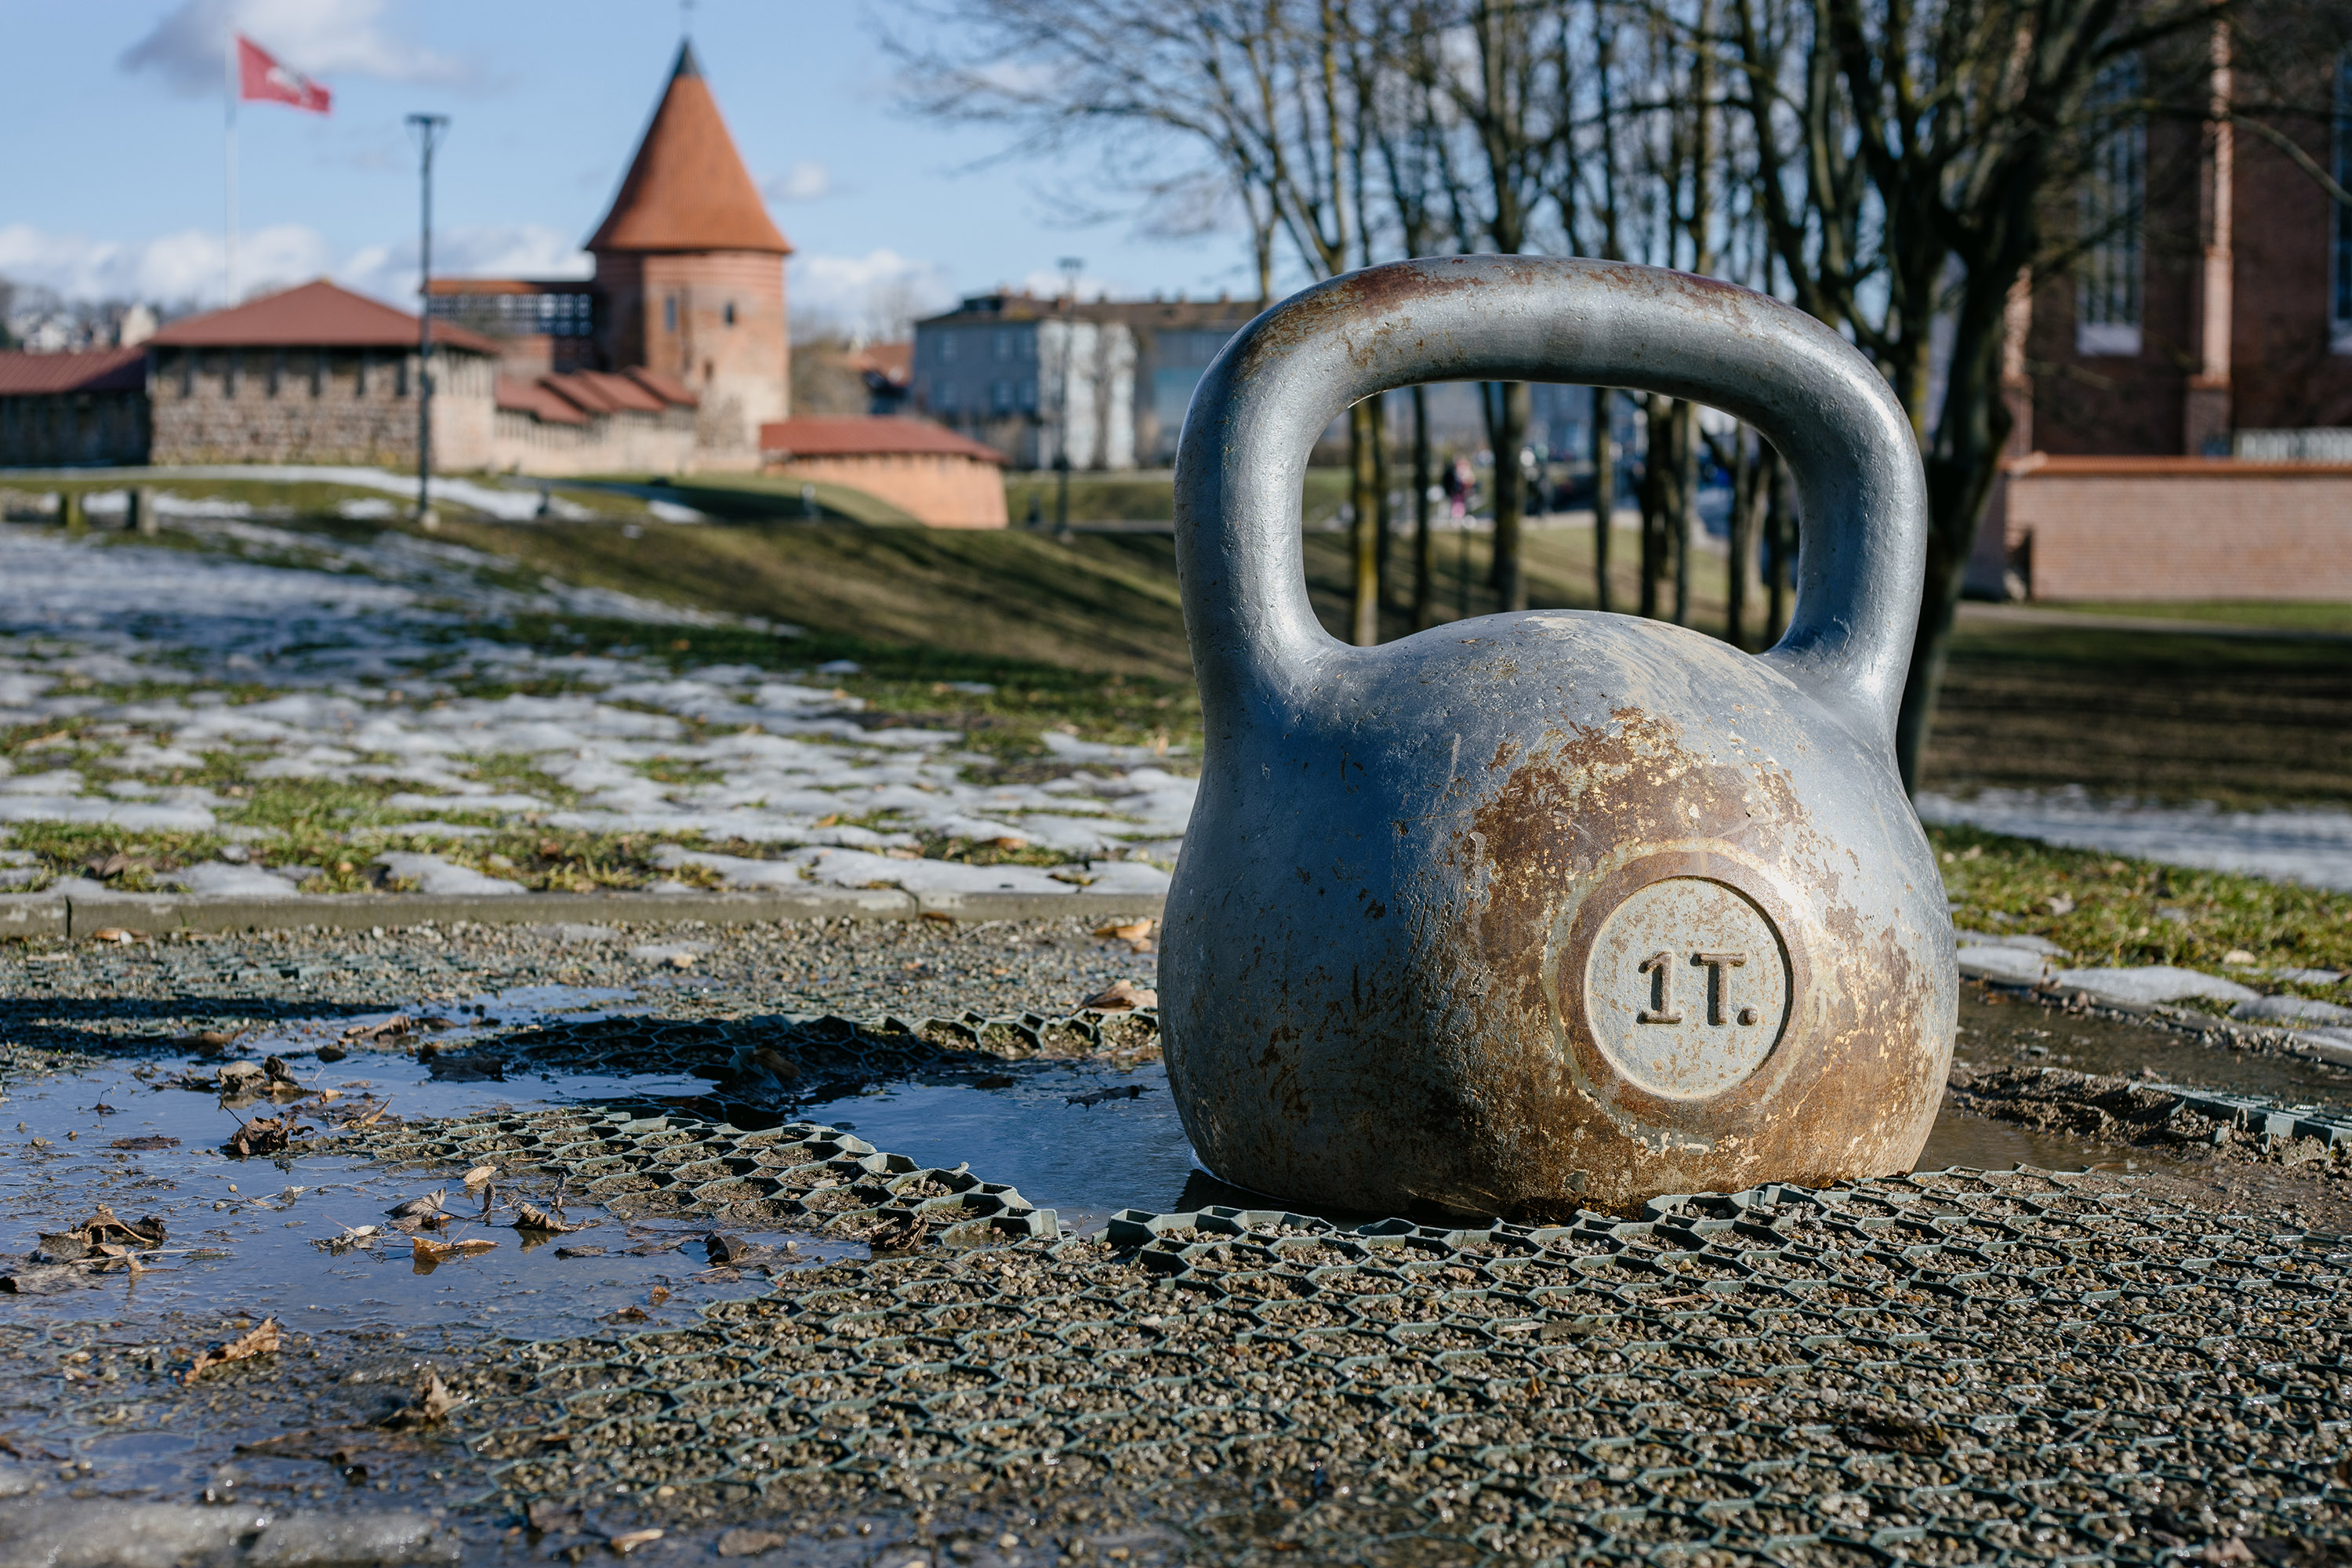 The reason why Lithuanian men are so strong - 1-ton kettlebell shot at f4